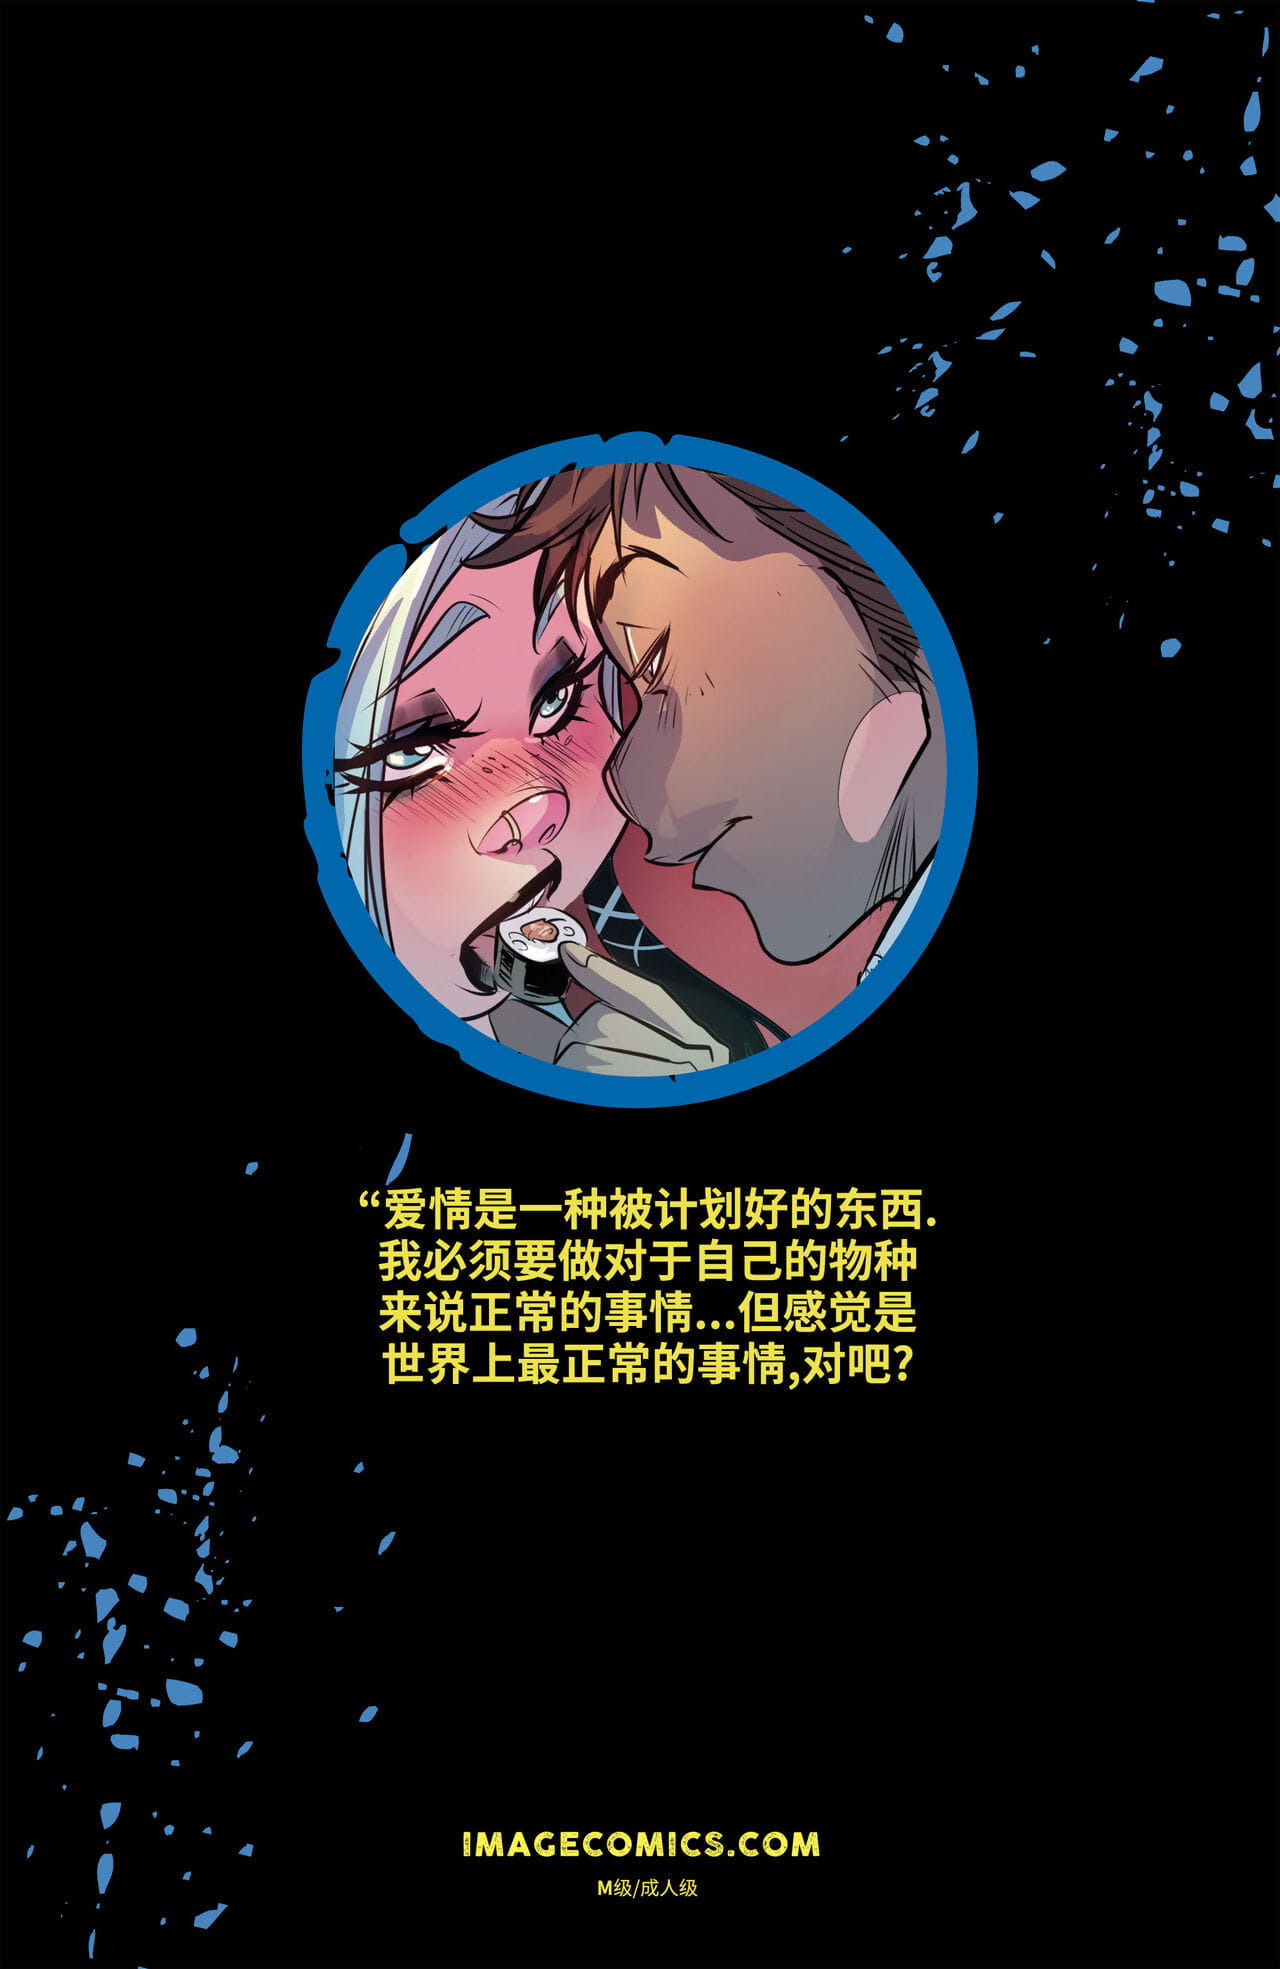 Unnatural - 反自然 - Issue 3 page 1